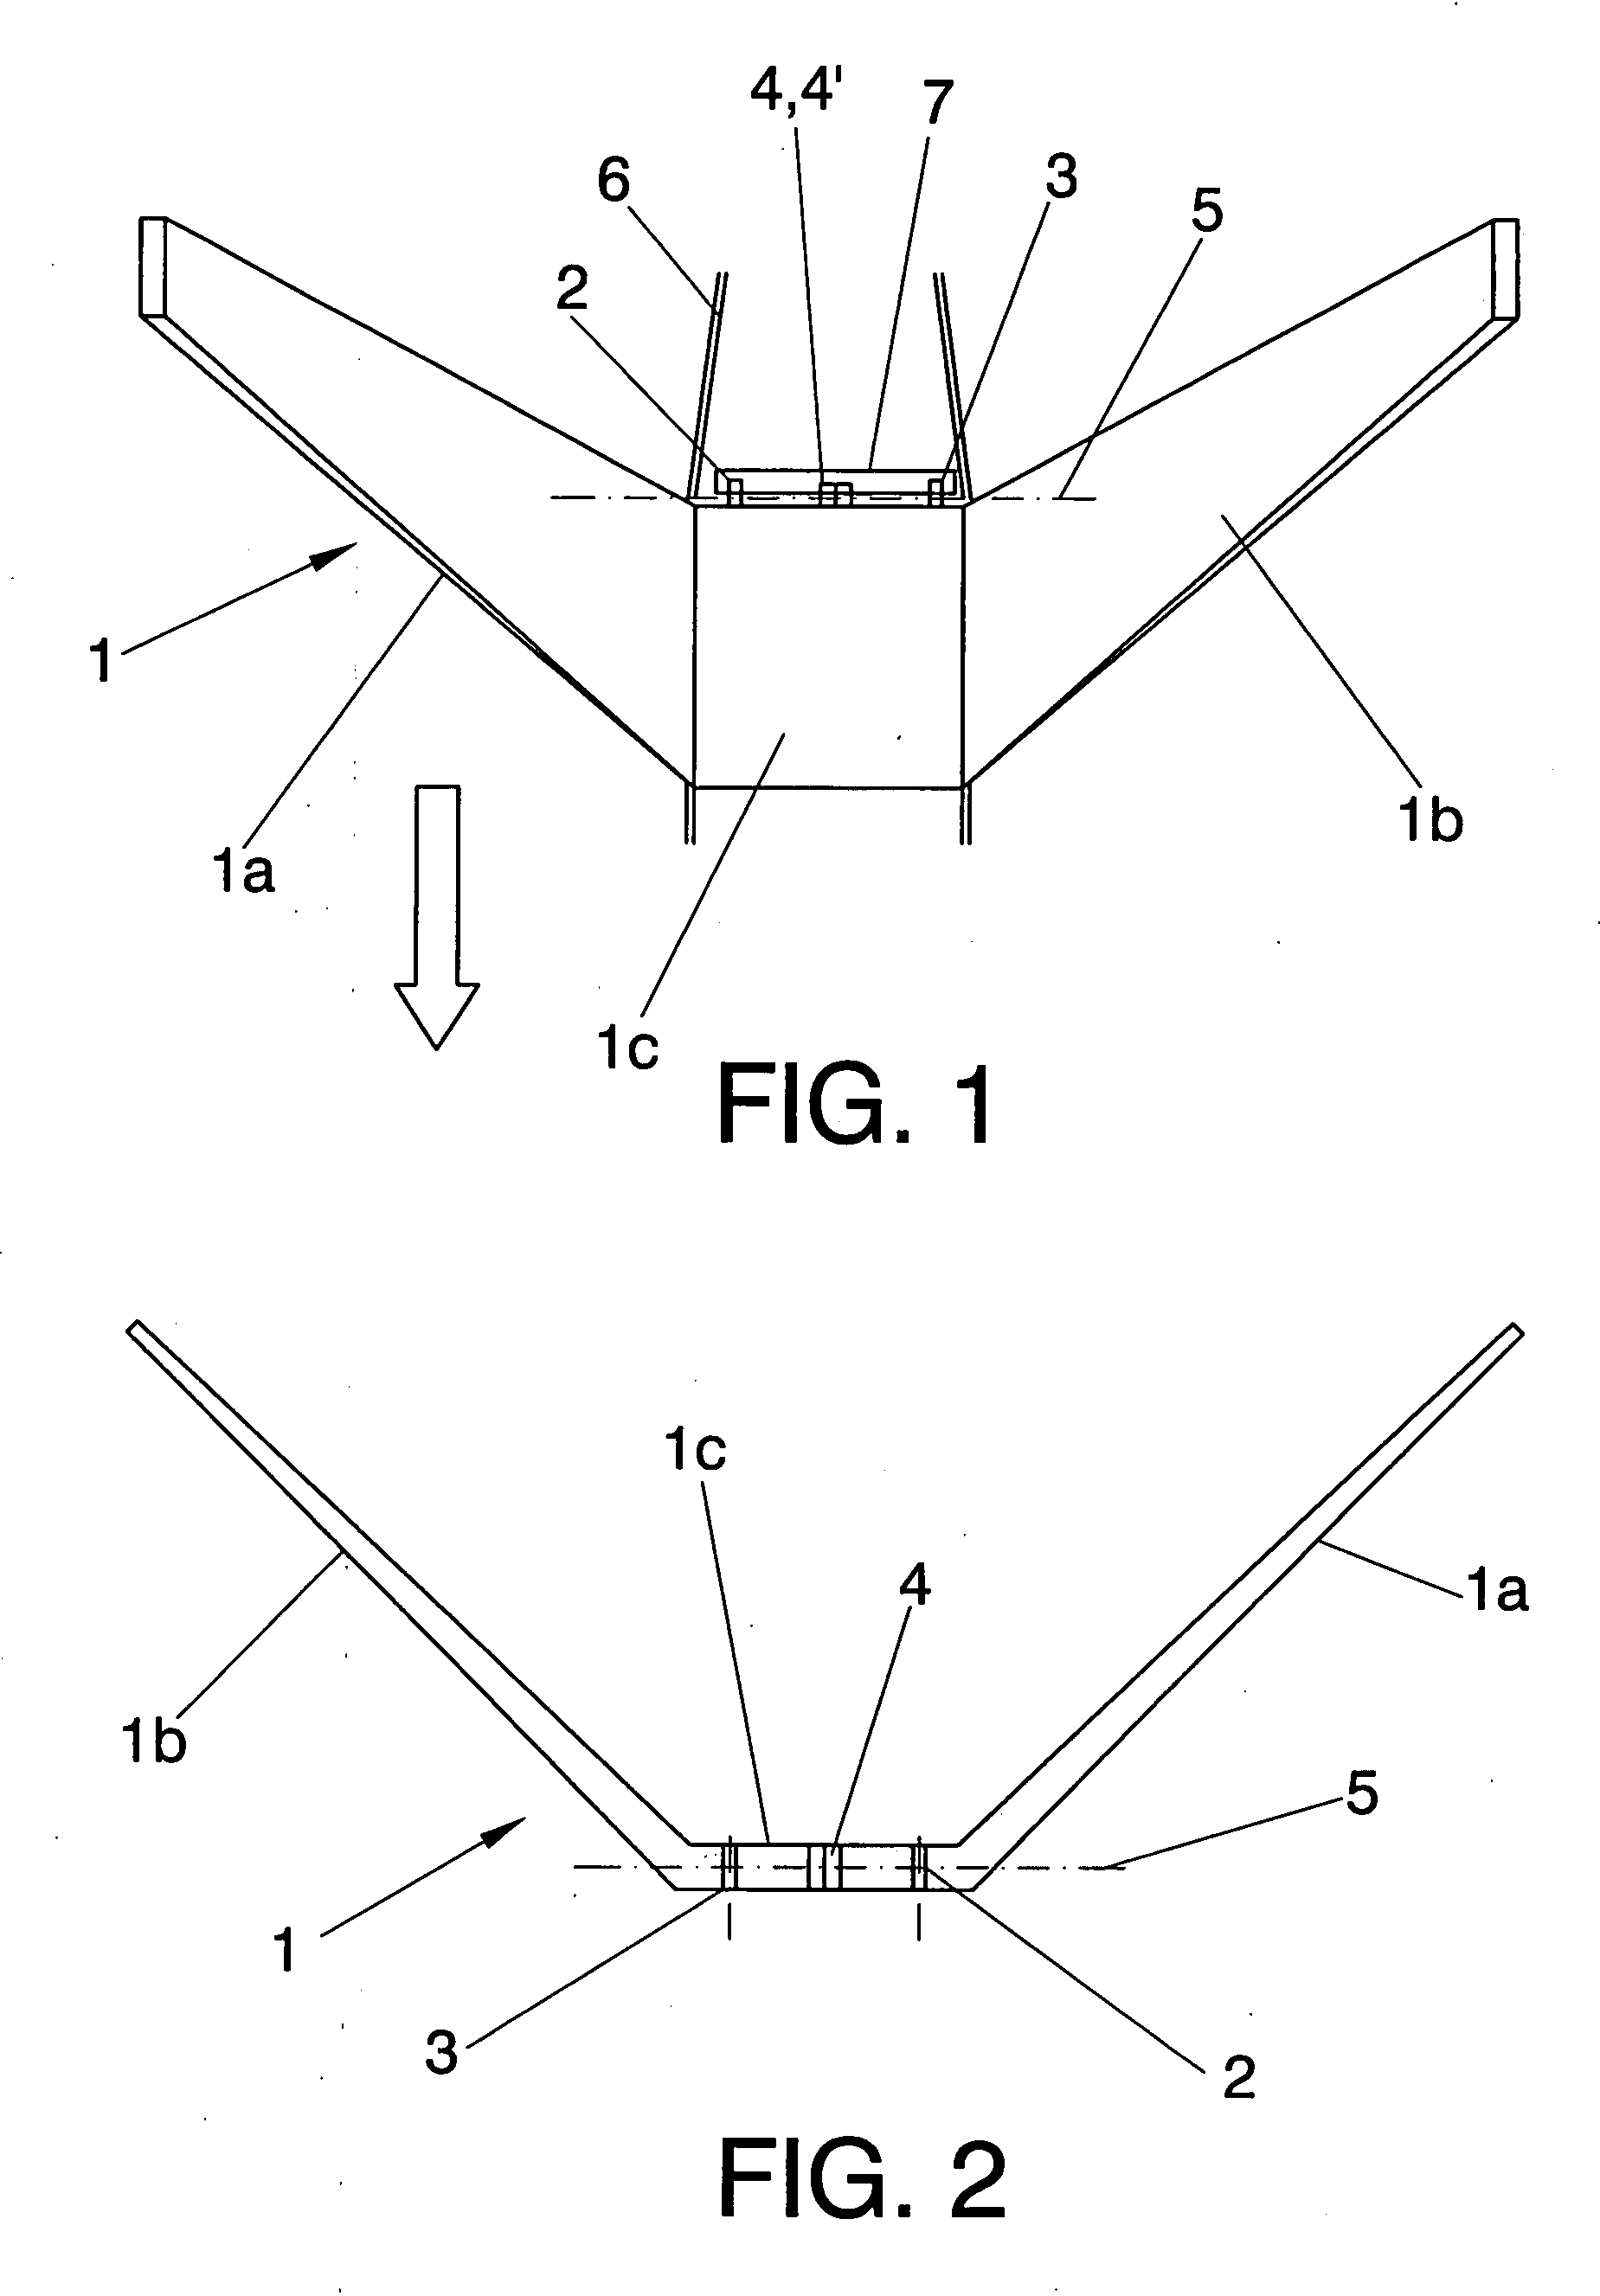 Pivoting coupling system for a large dihedral empennage to the tail fuselage of an aircraft